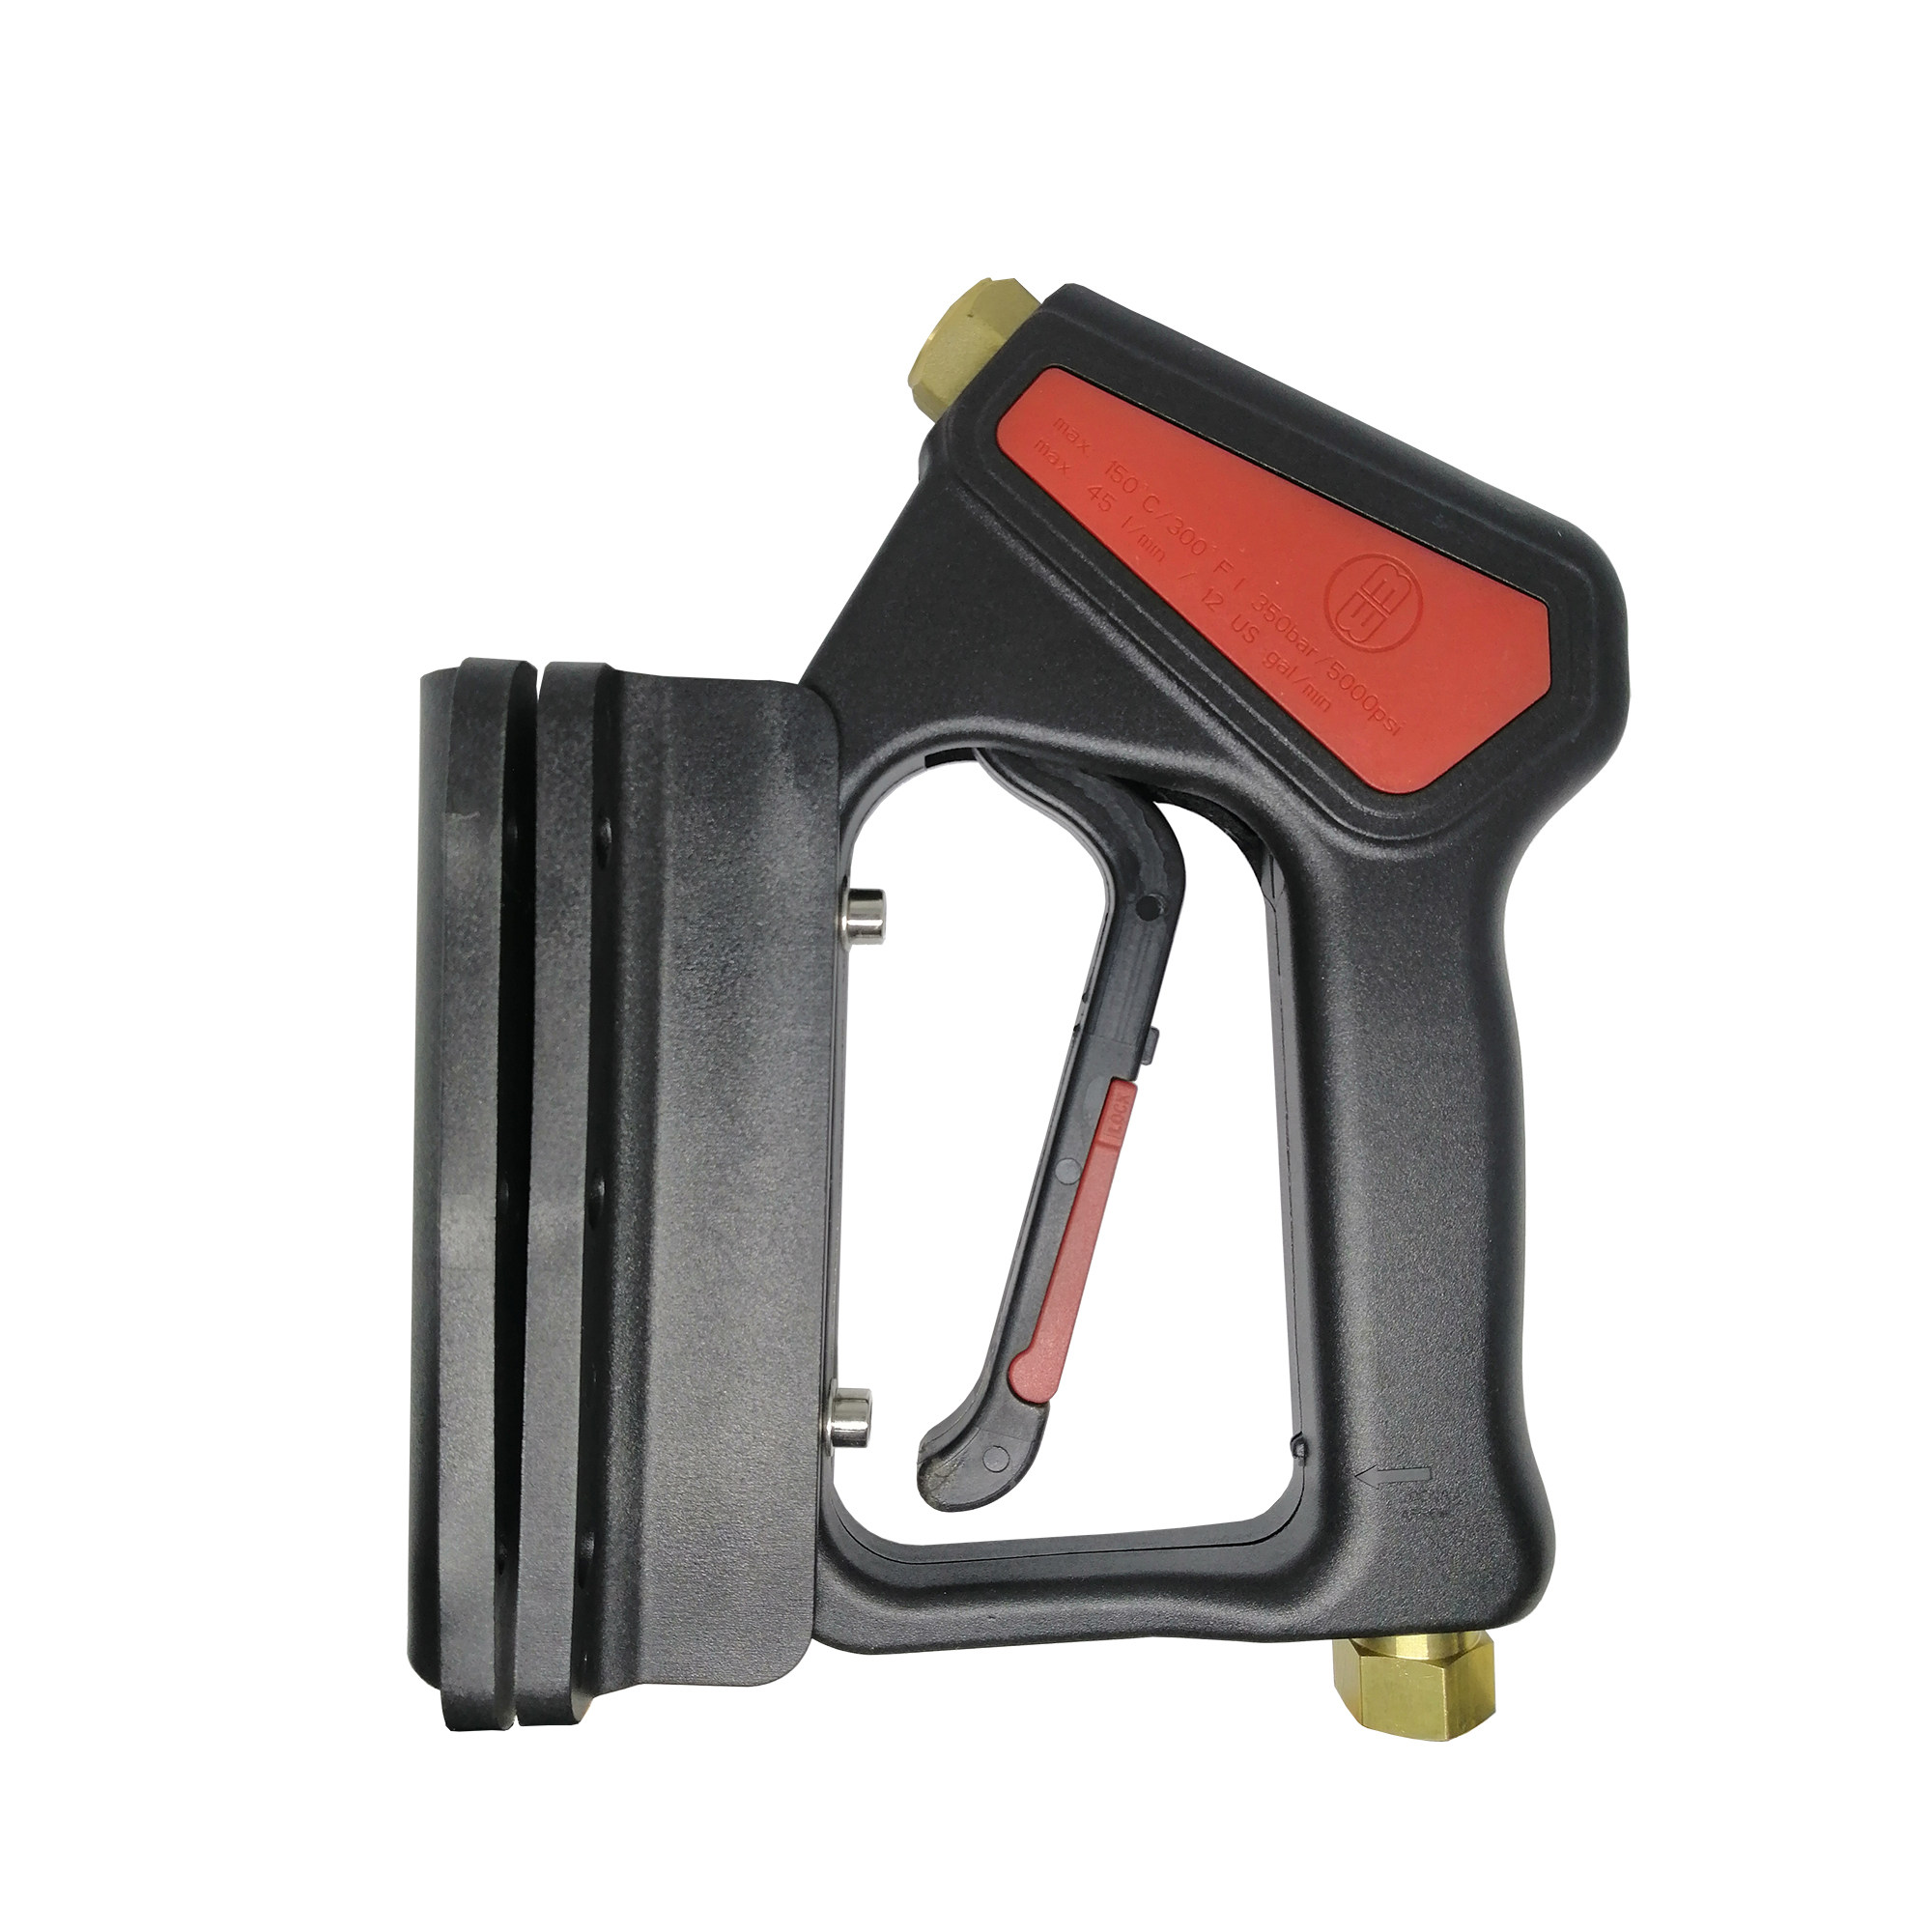 High Pressure Washer Trigger Gun 5000psi with Holder for 18ft Telescoping Wand TG5032